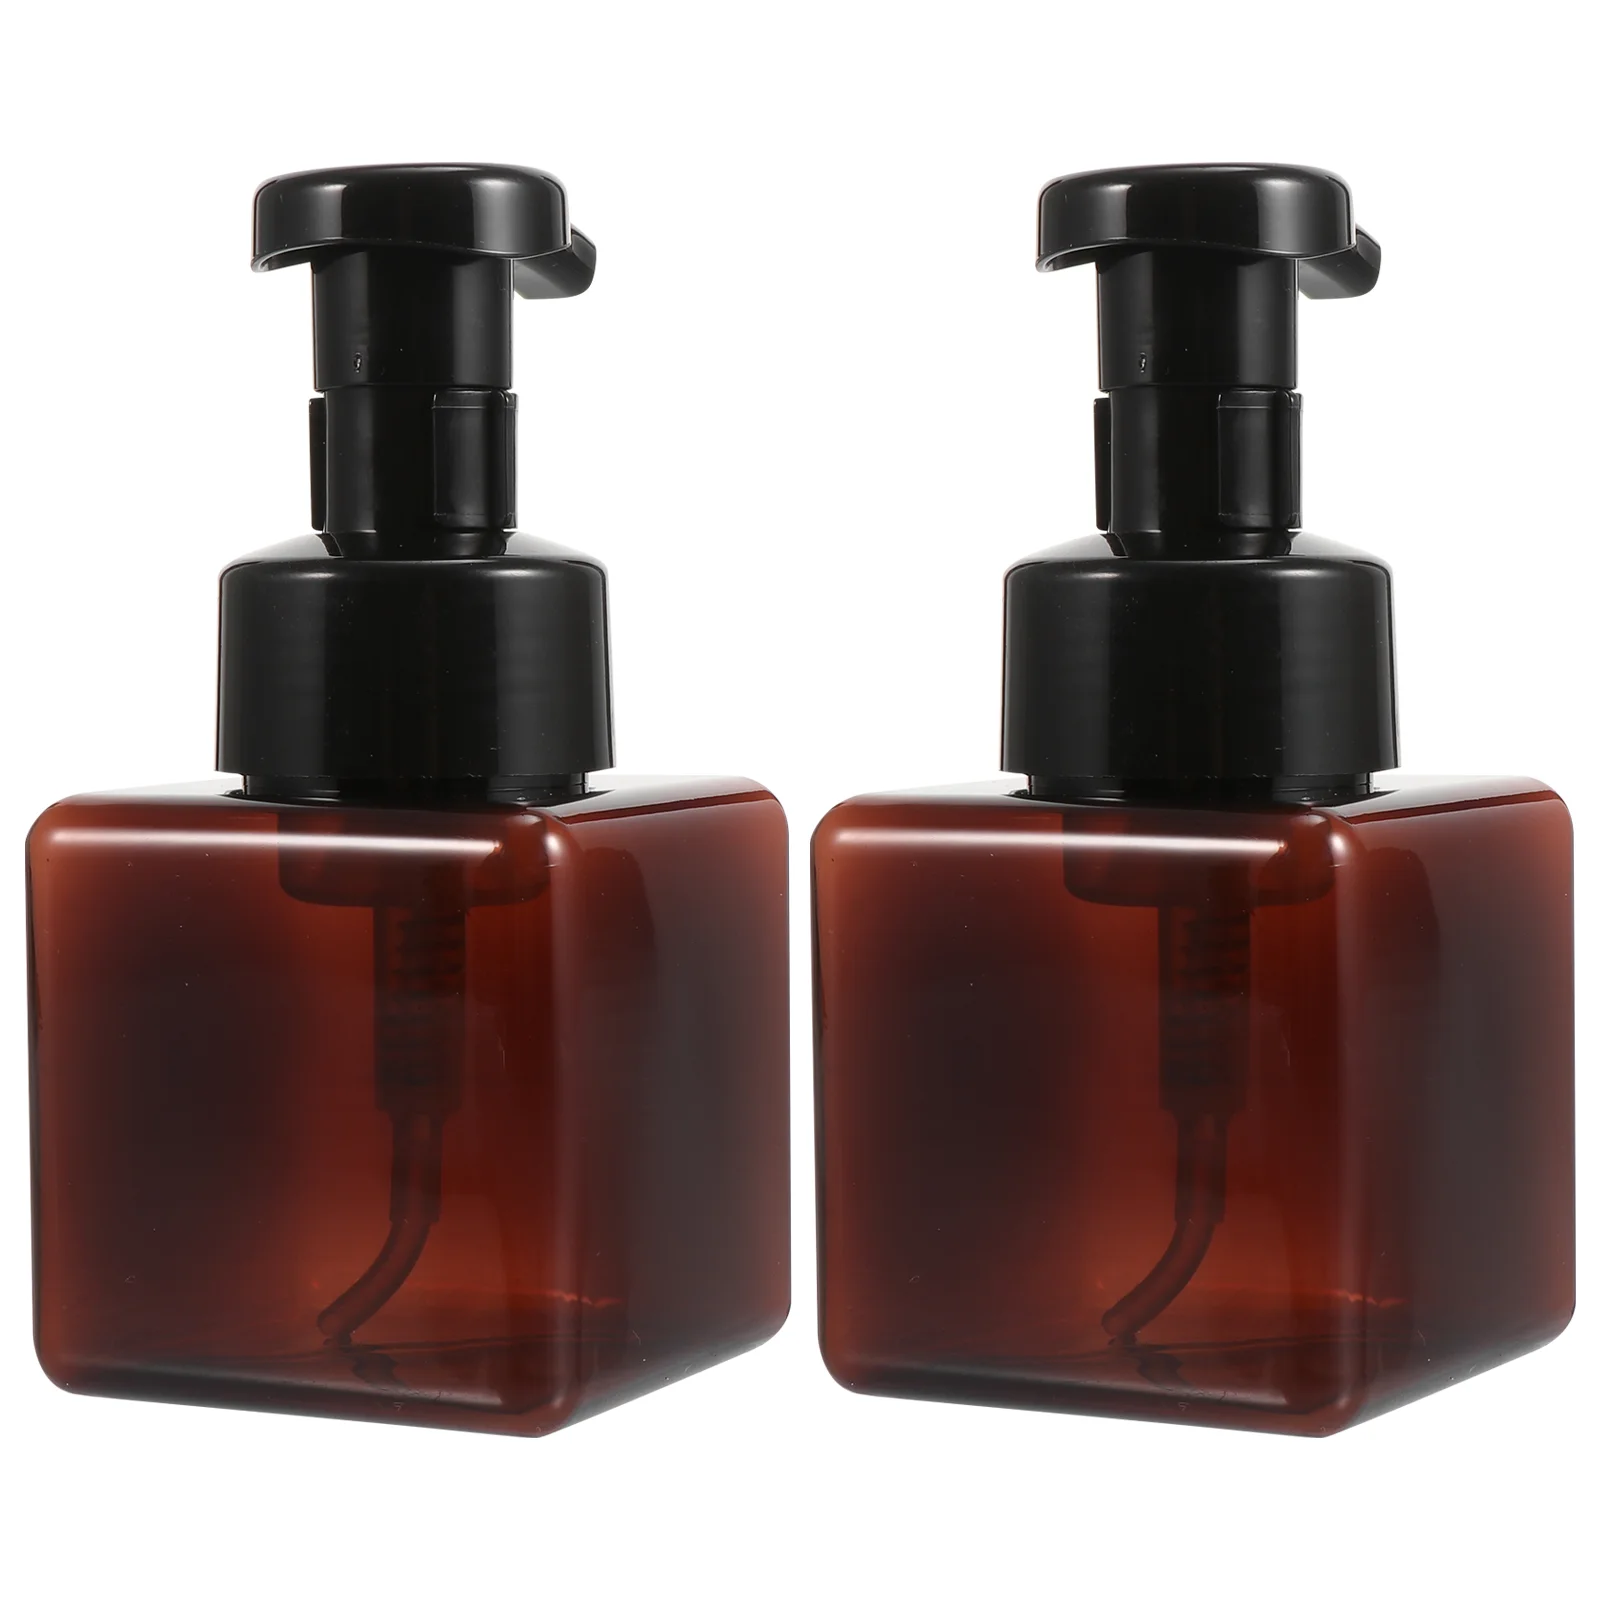 Hand Soap Dispenser Foaming Hand Bottle: 2pcs 250ml Lotion Cleanser Dispenser Pump Container for Bathroom Vanities Kitchen Brown 2pcs kitchen silicone heat insulation anti hot gloves cotton thickening printing high temperature oven baking microwave gloves